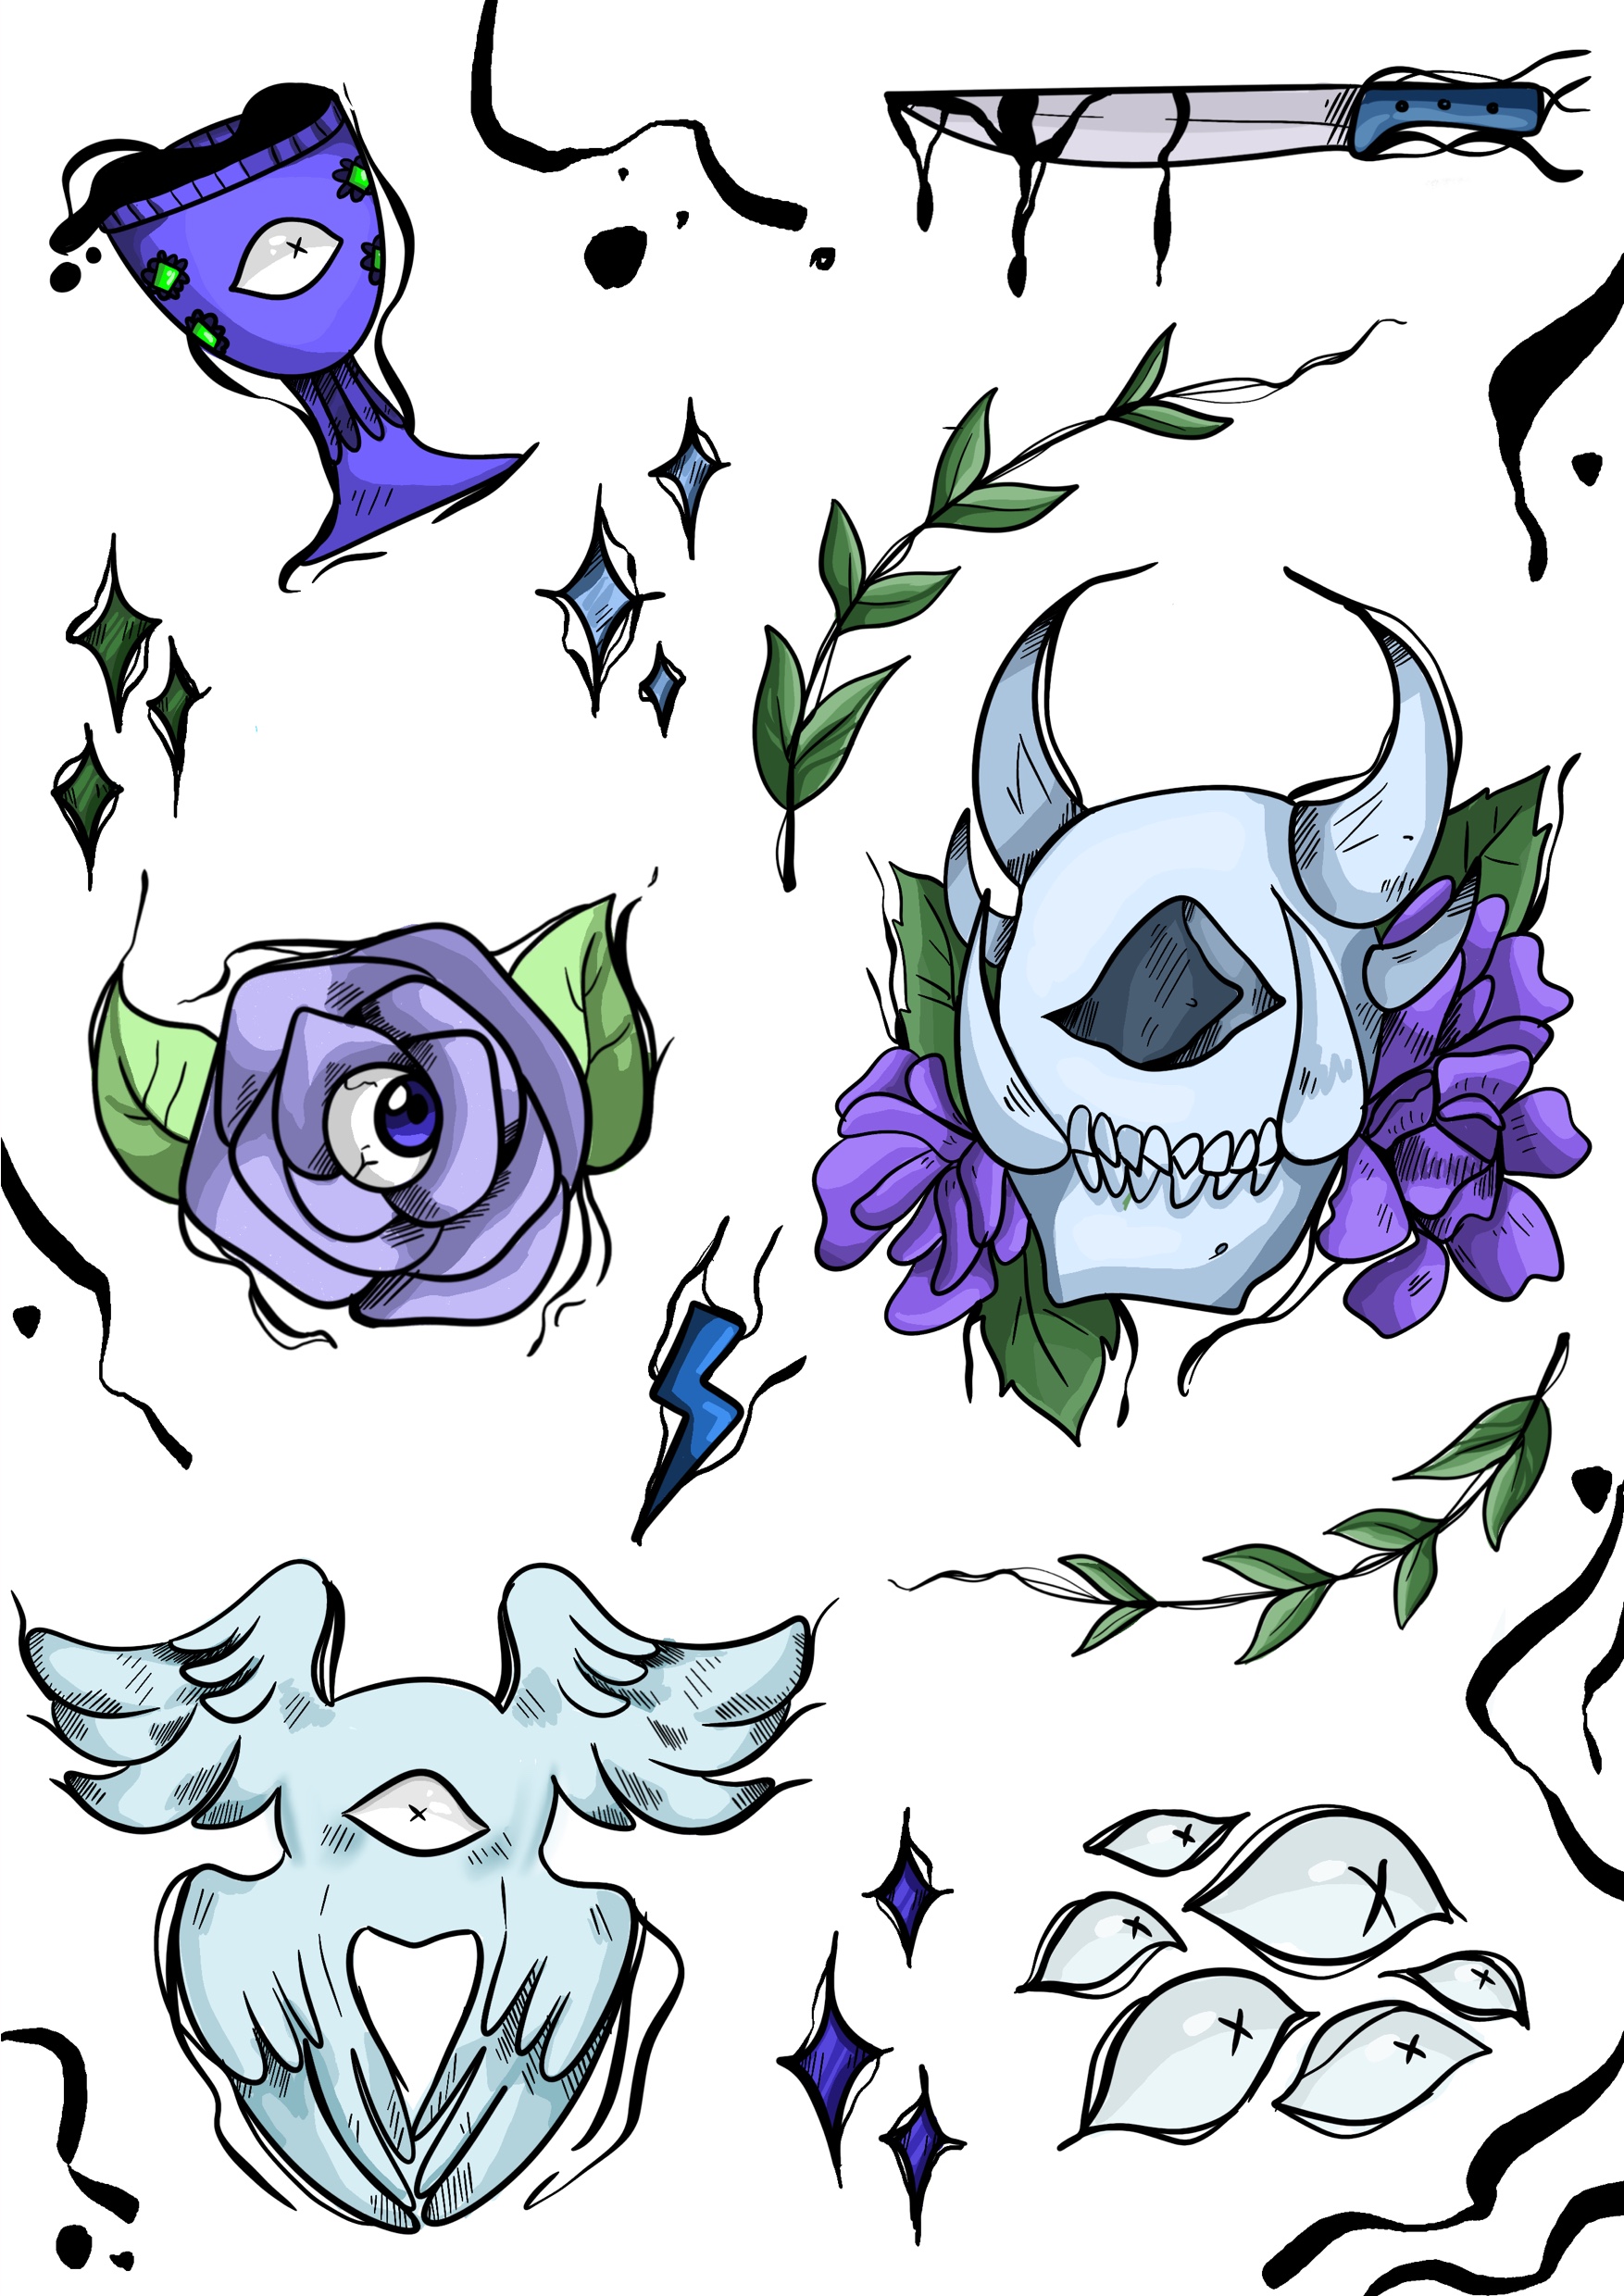 Tattoo designs depicting skulls with flowers, knife, chalice with an eye and neon green crystals, angles like ball with 4 wings. All in a blue and neon green colour scheme.